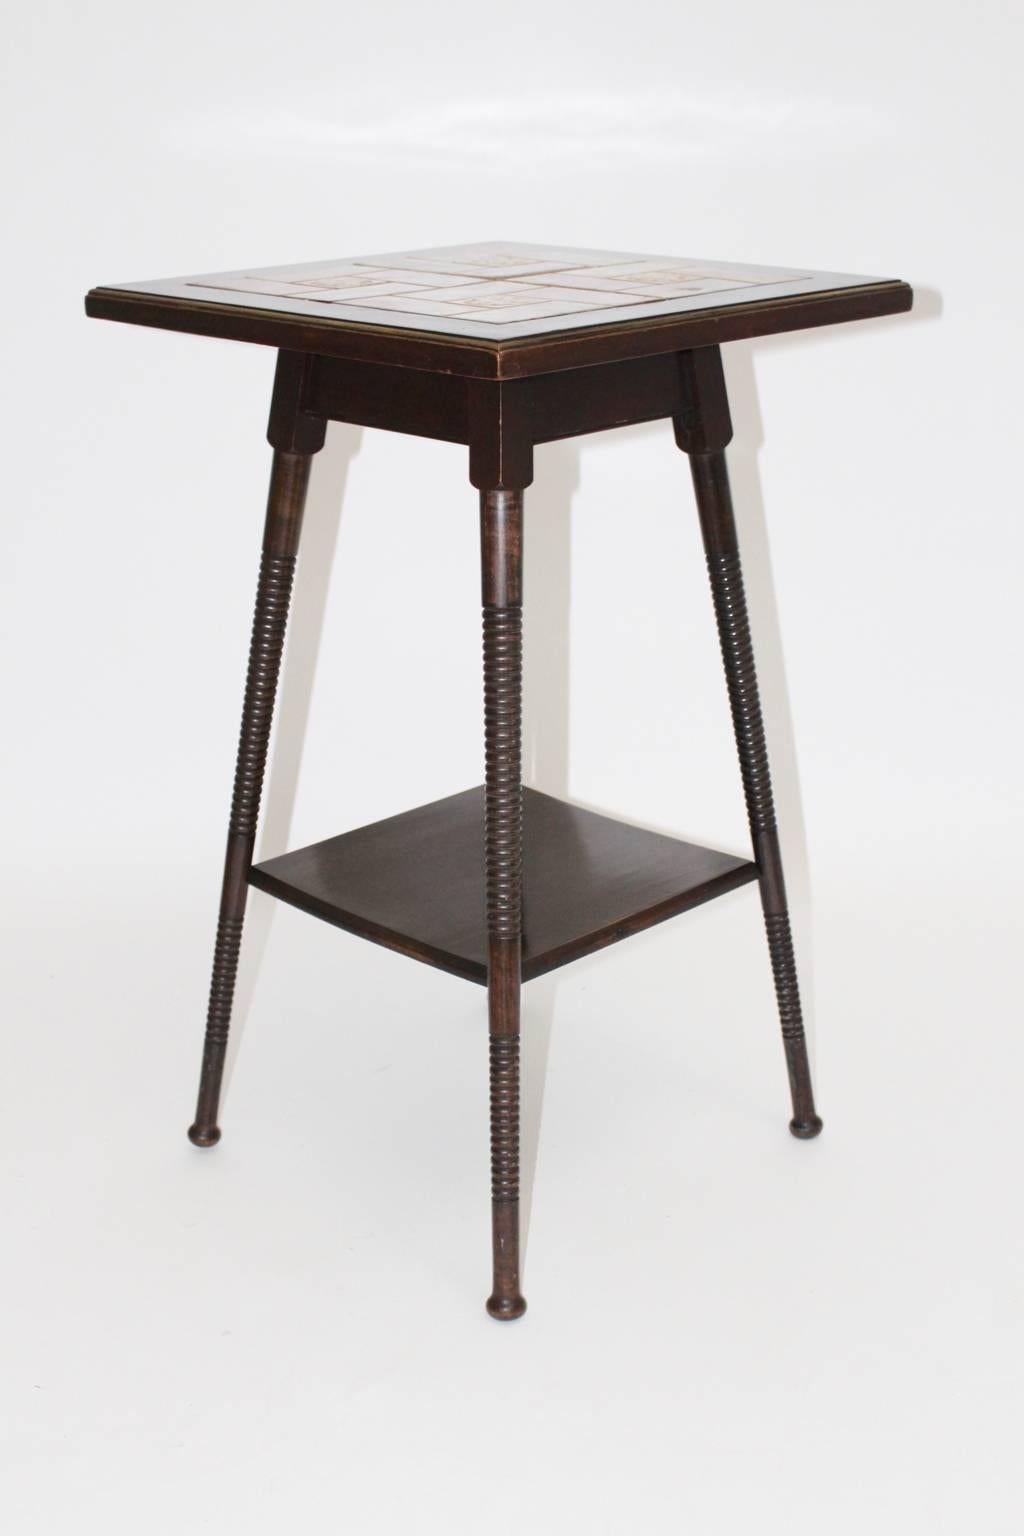 Two-tiered side table, beechwood brown stained with turned legs.
The top shows the original green and redbrown ceramic tiles and a brass edge.
This kind of side table was used by Adolf Loos for his apartment.

Literature: Adolf Loos; Burkhard